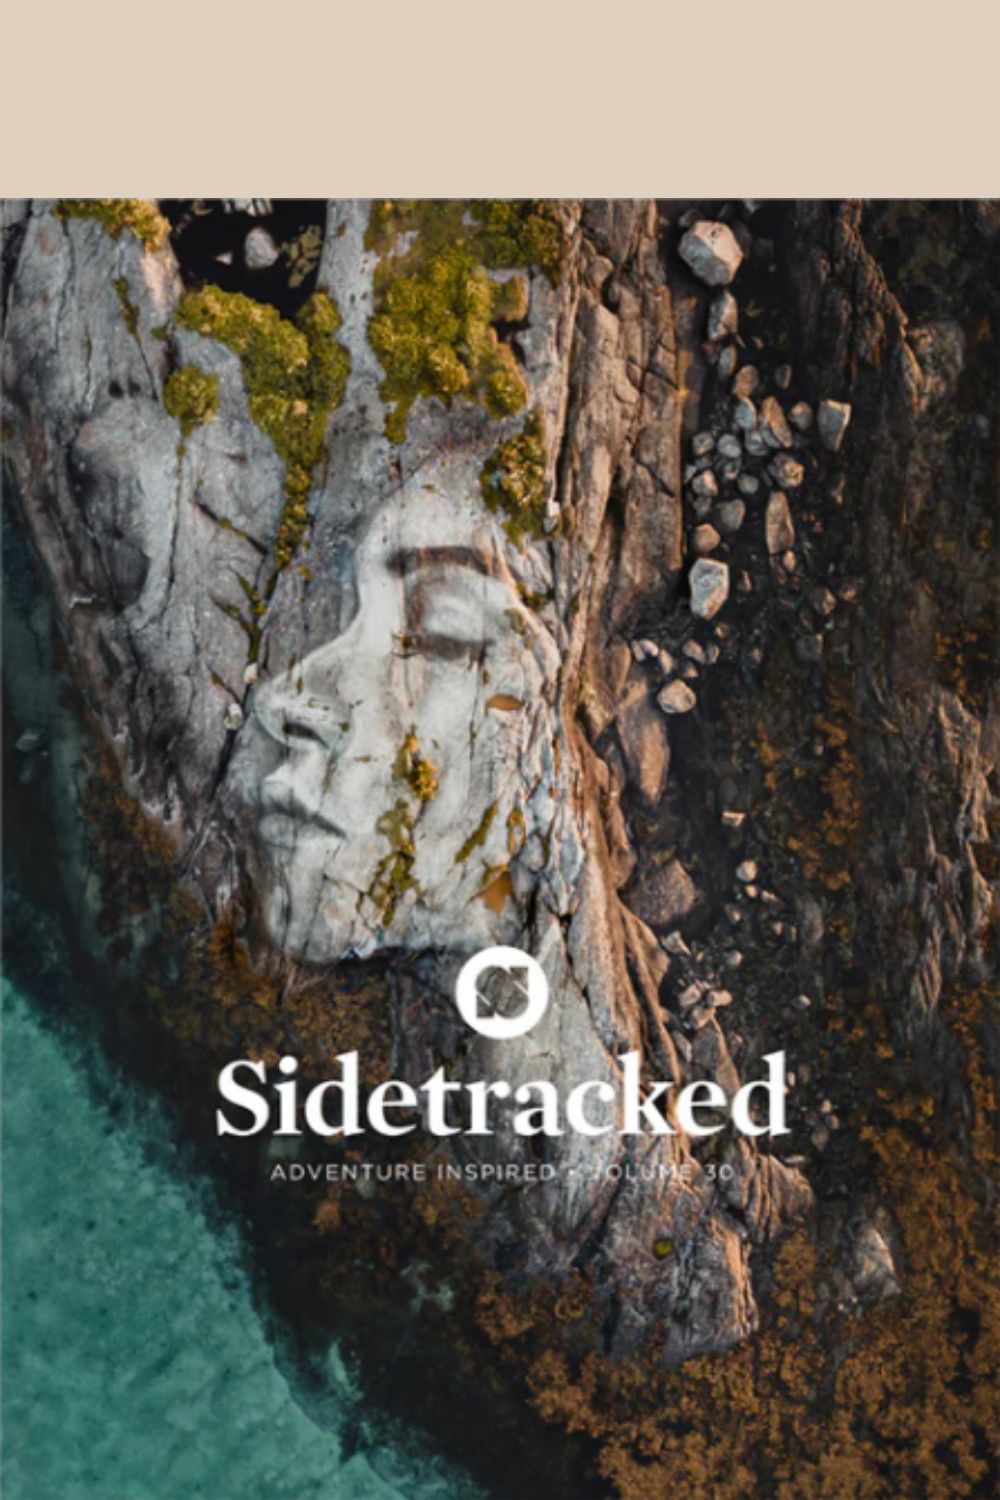 Sidetracked Issue 30 cover